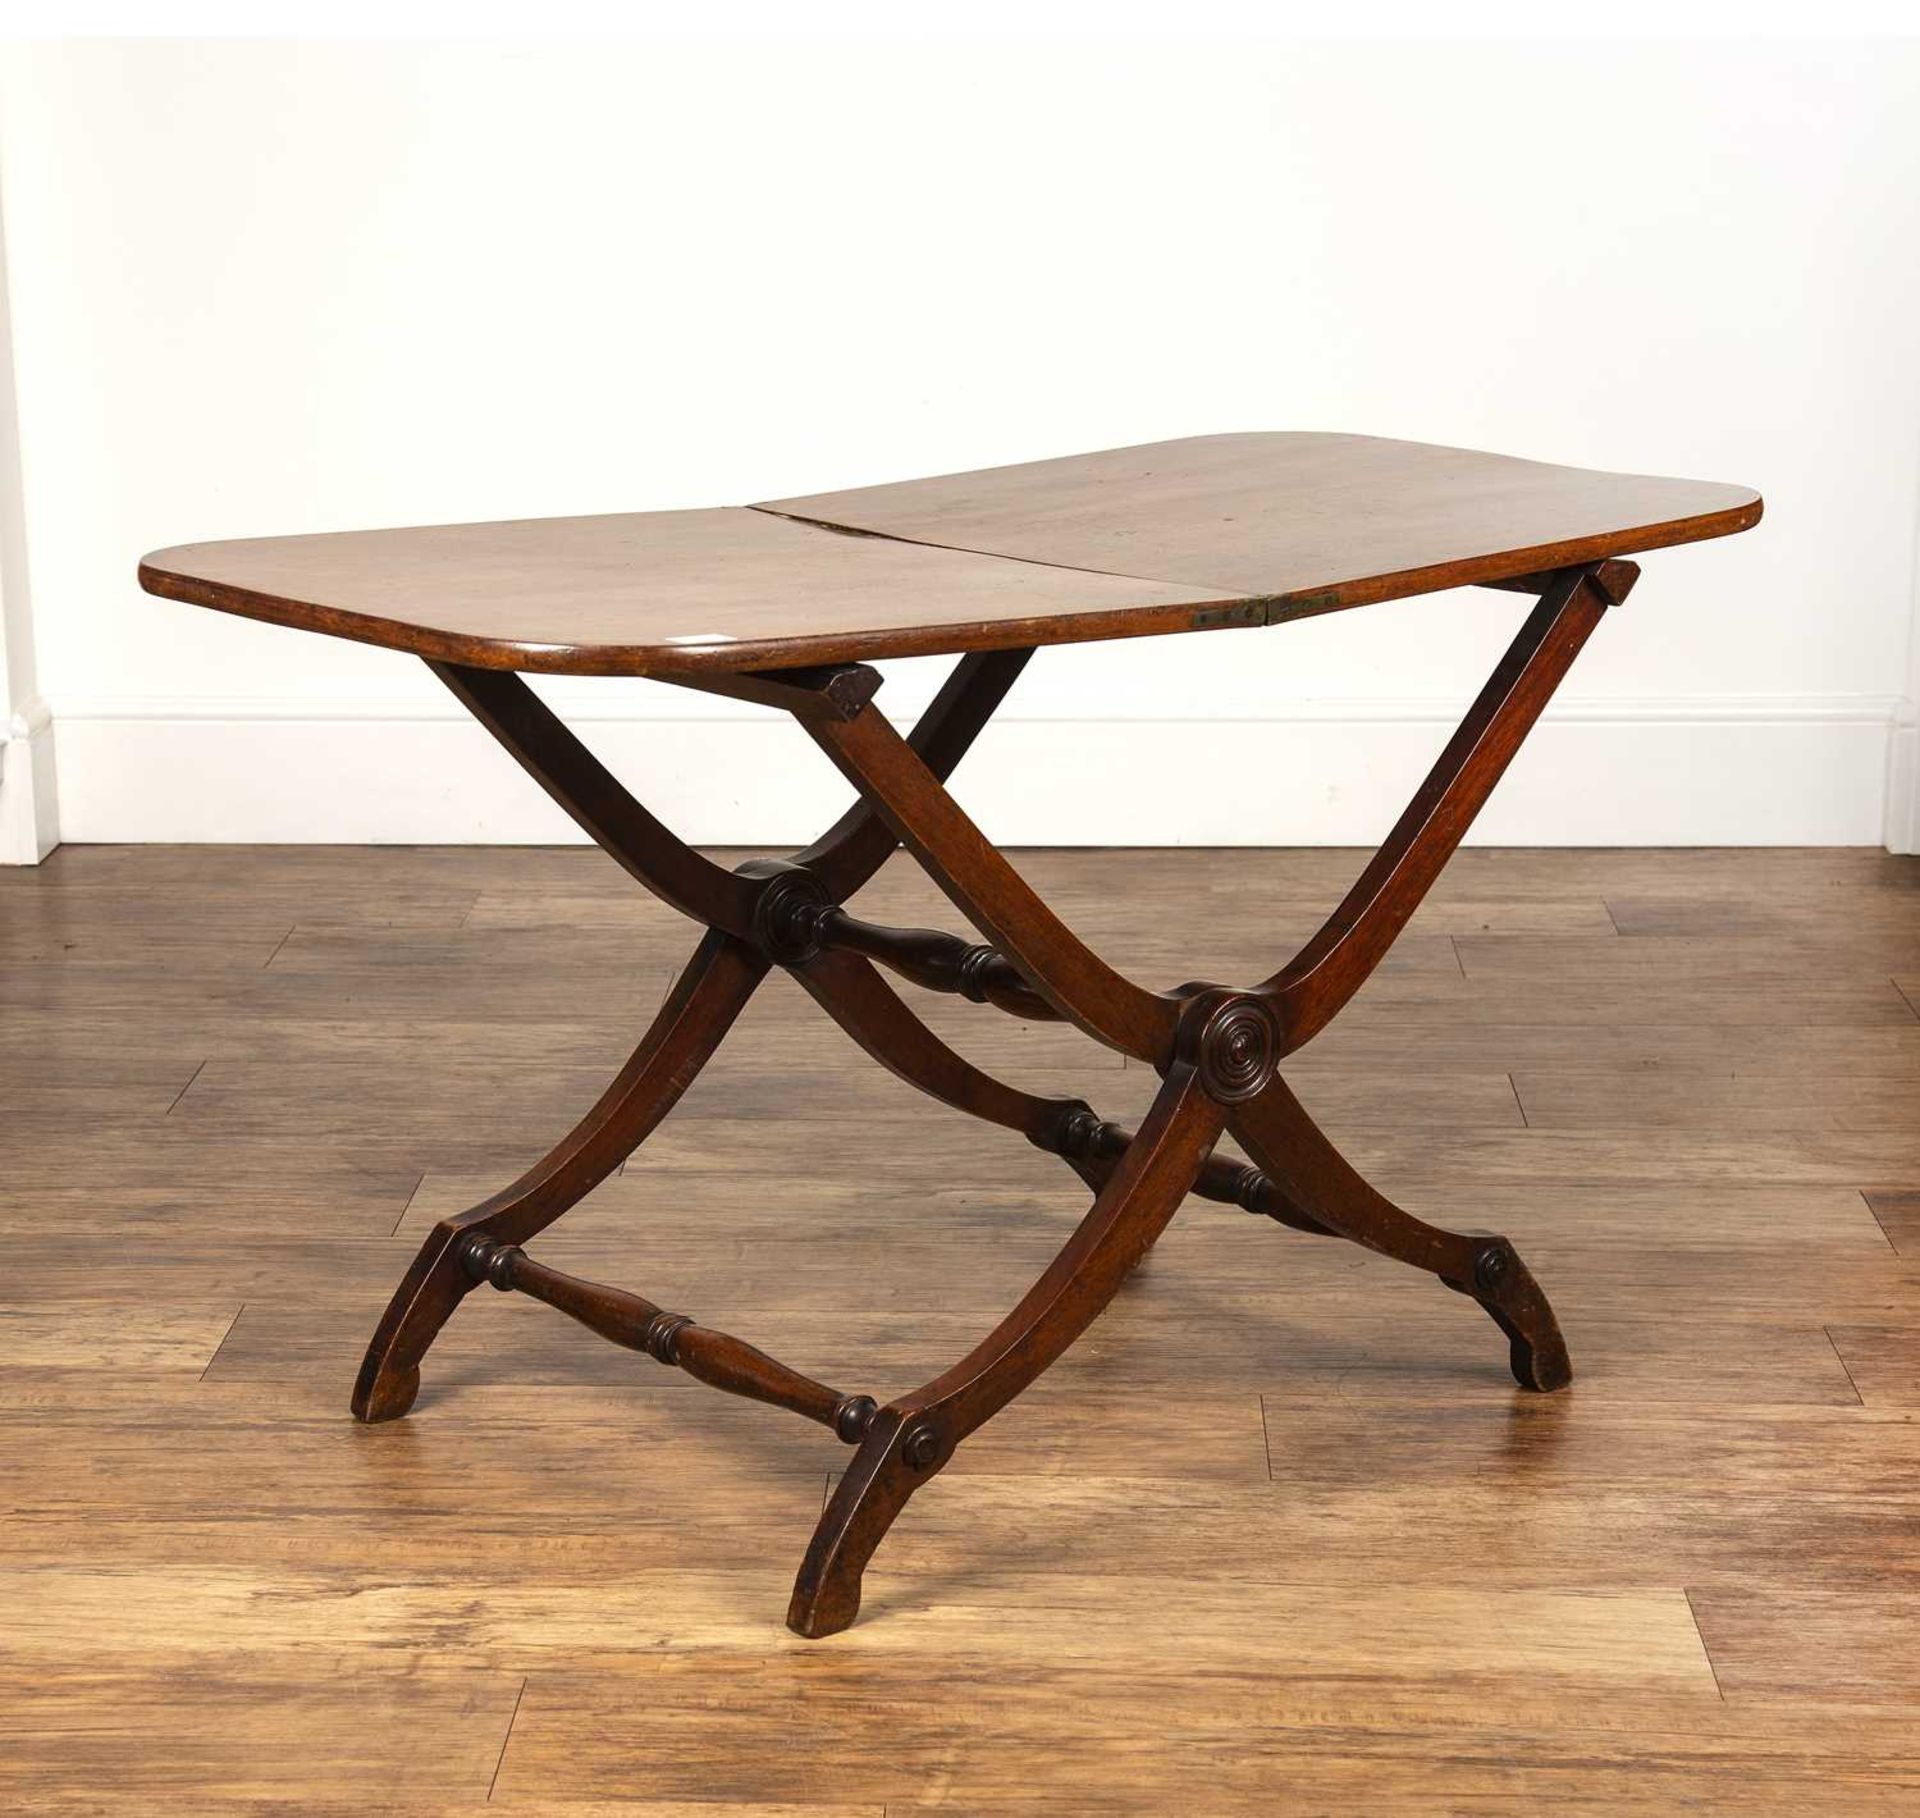 Mahogany folding coaching or campaign table 19th Century, on 'x' stretcher, 111cm wide x 64.5cm high - Image 2 of 5